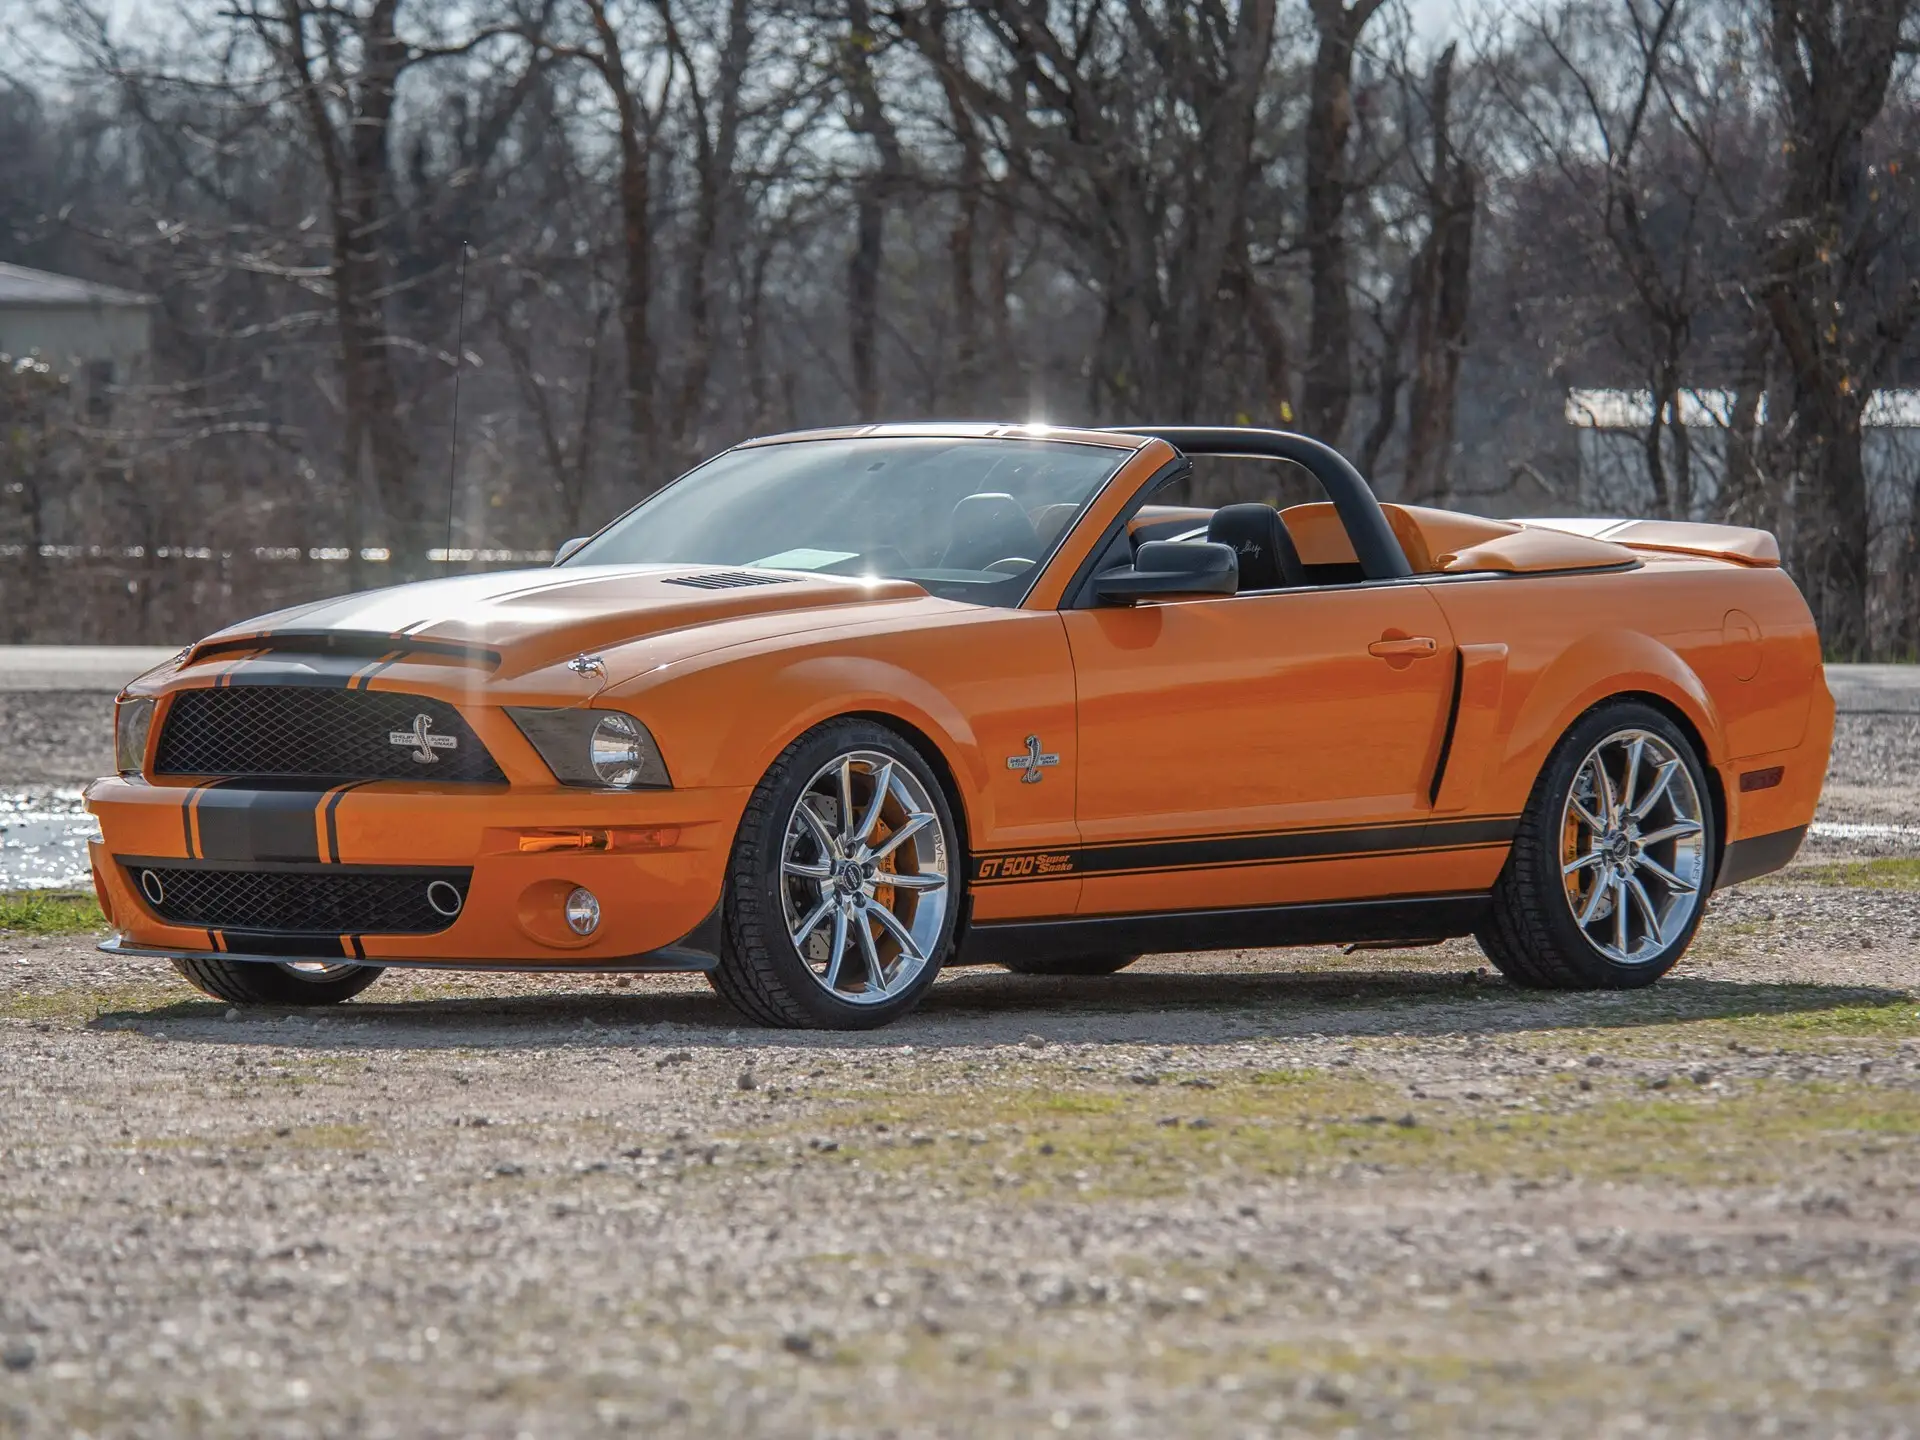 Mustang Of The Day: 2007 Ford Mustang Shelby GT500 Super Snake Convertible